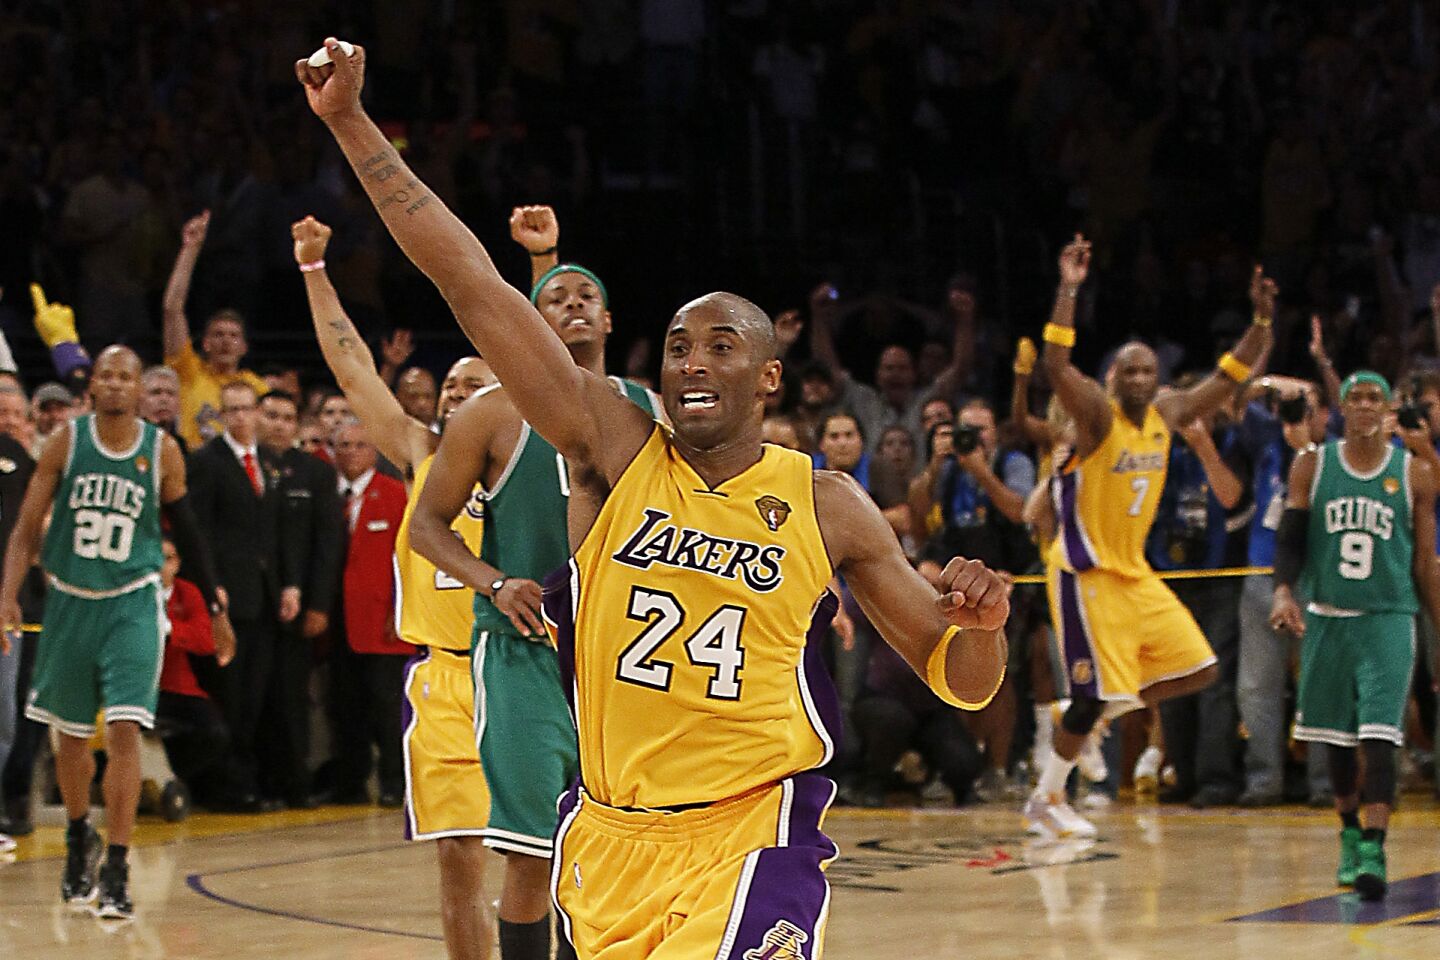 Kobe Bryant celebrates among other players on the court after the Lakers beat the Boston Celtics in the 2010 NBA Finals.